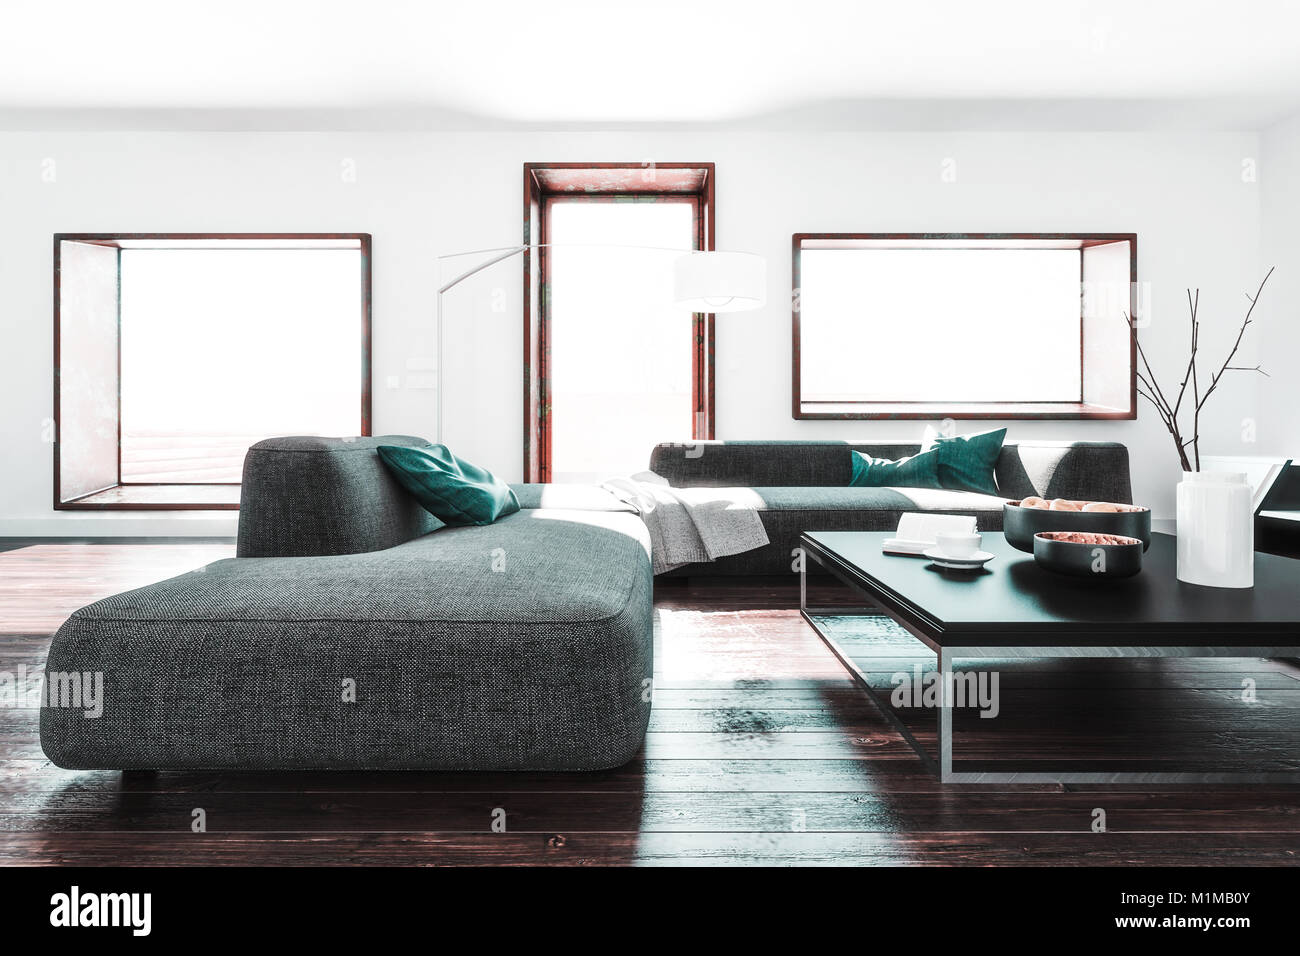 Room With White Walls Long Sofa And Coffee Table On Dark Wooden